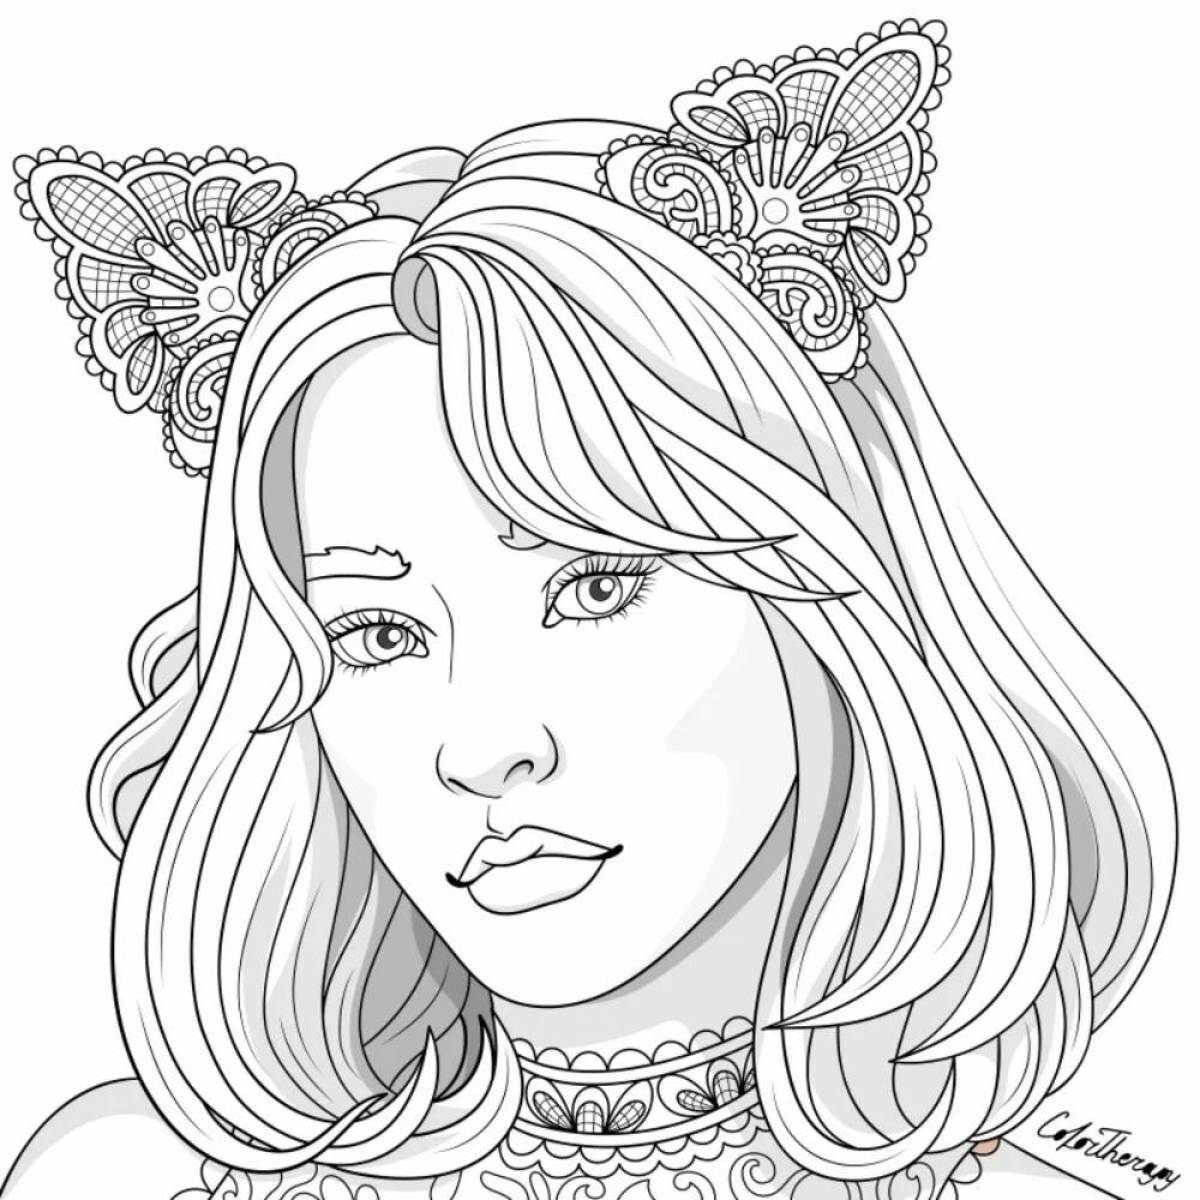 A fascinating coloring book for girls 8 years old